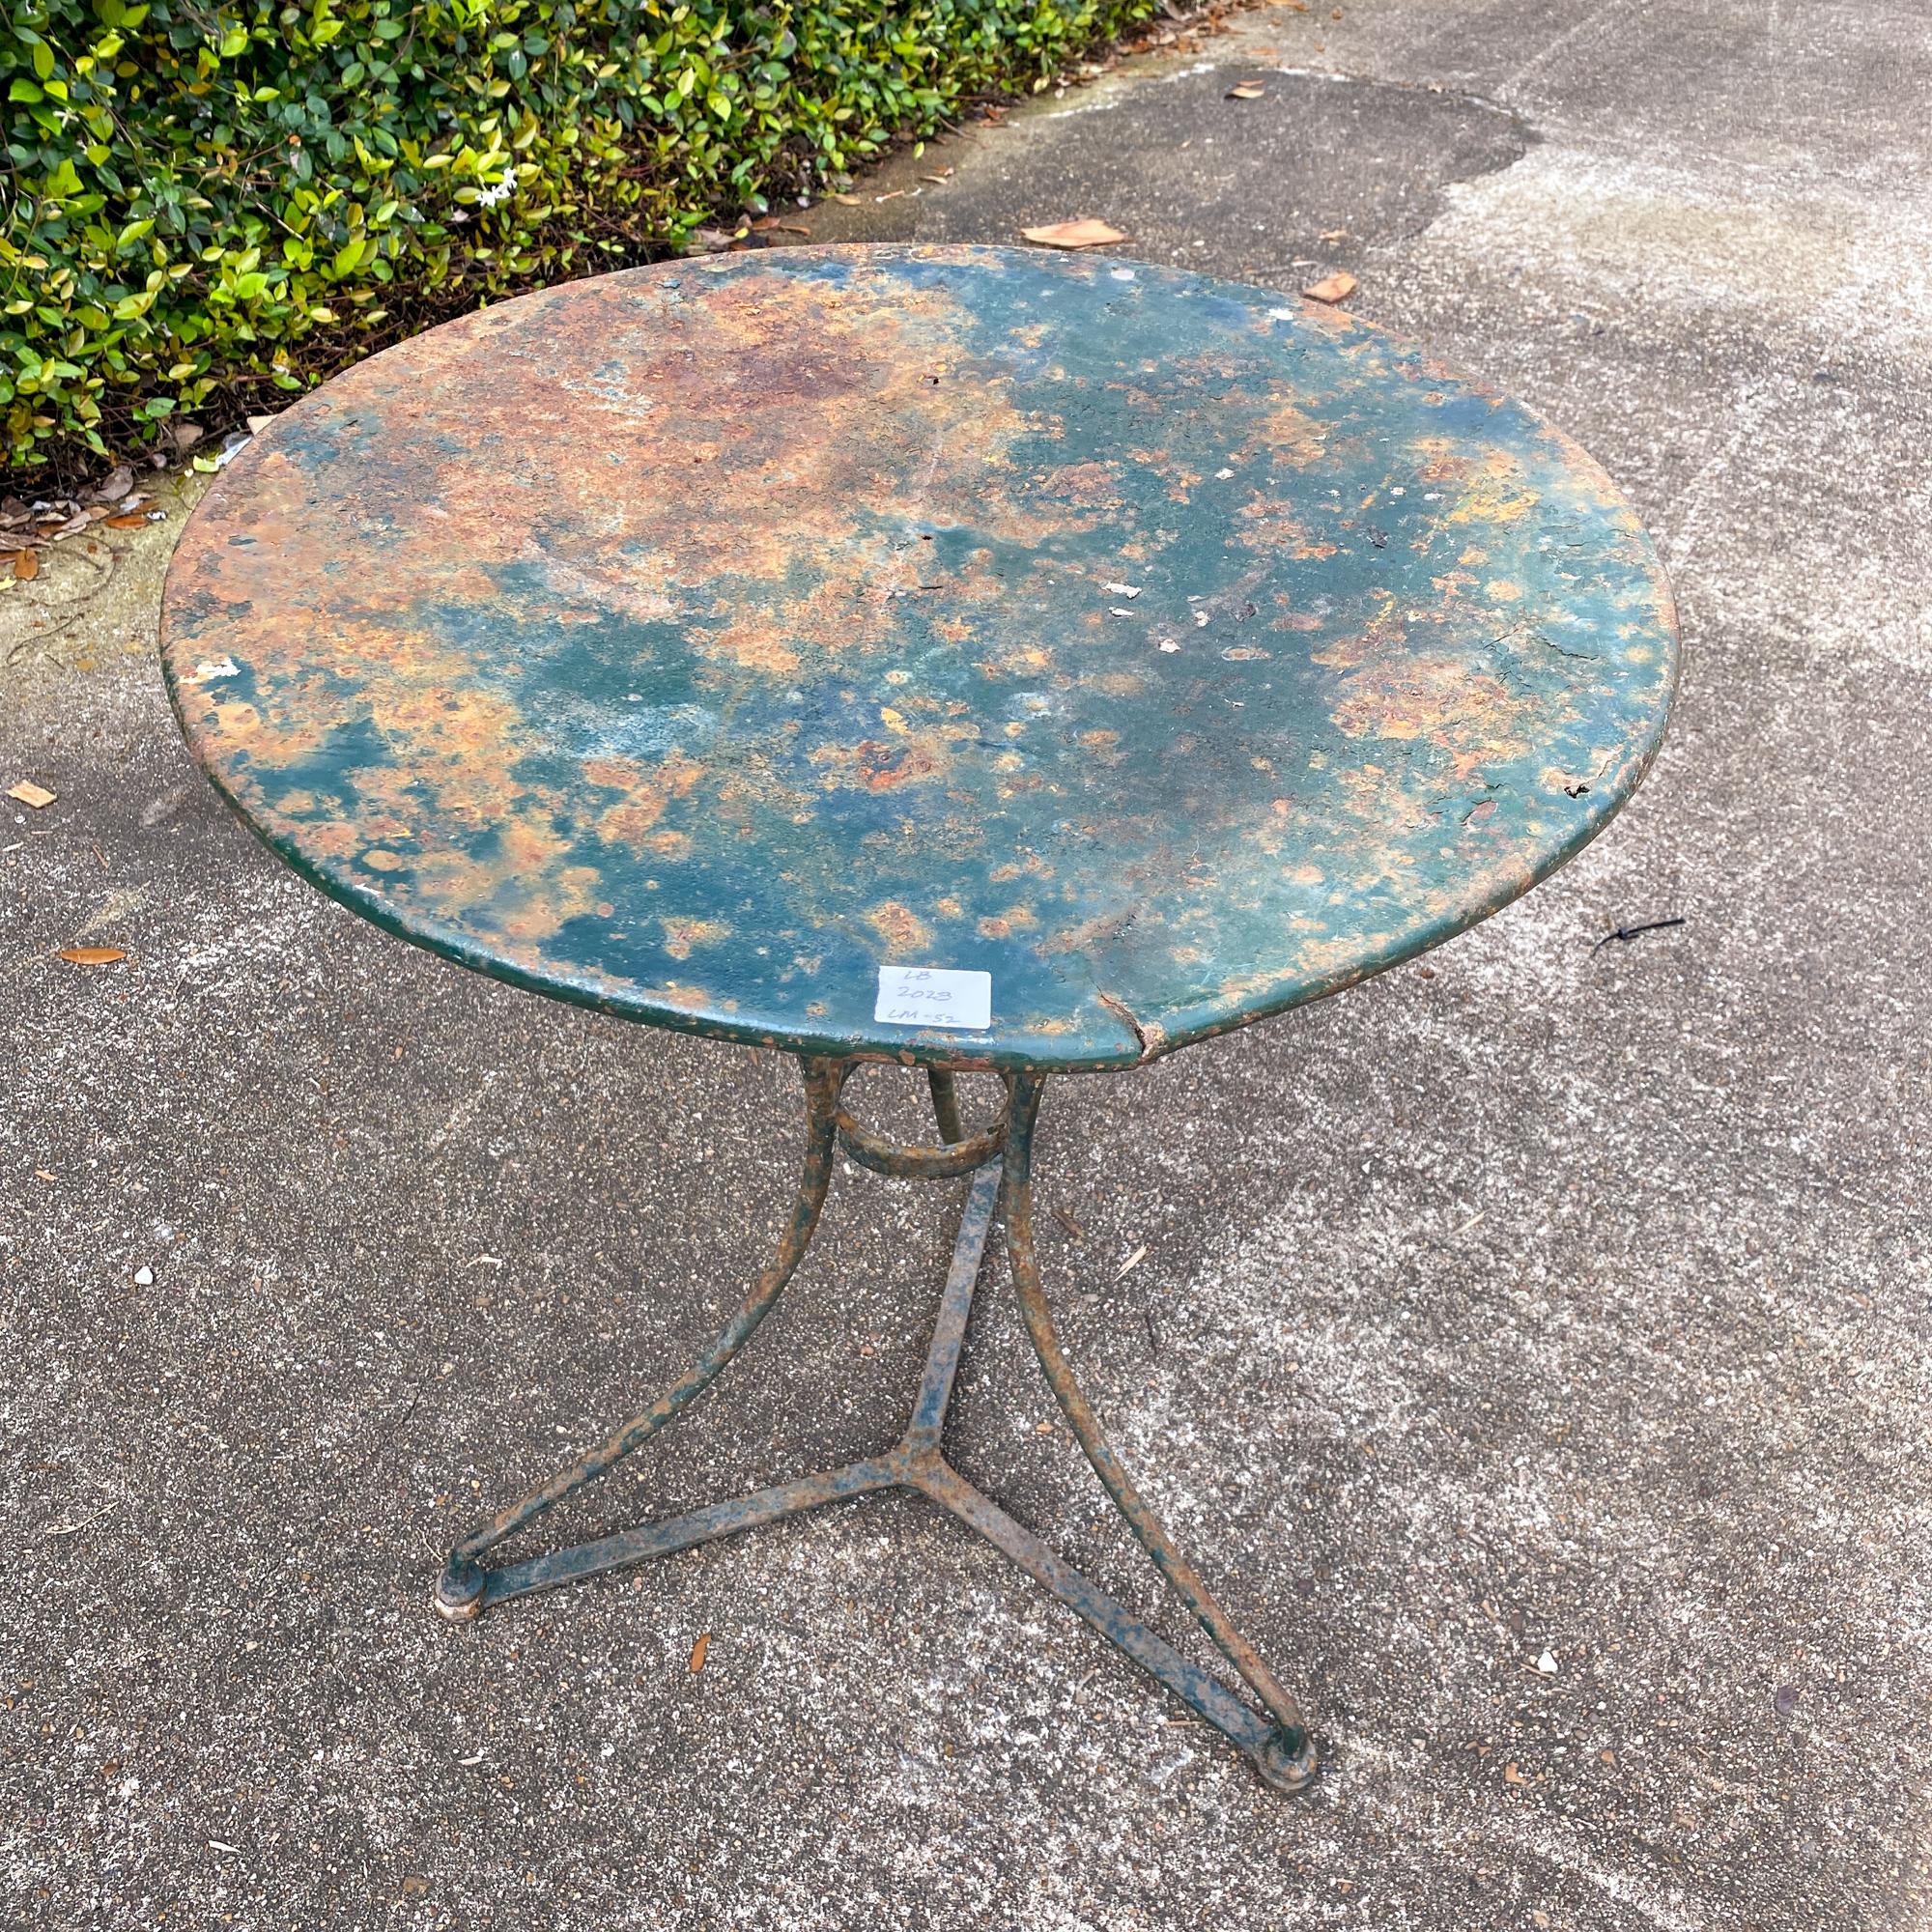 This is a charming and rustic metal bistro table that has been painted in a deep, forest green finish. Three legs with the Classic ring detail at center. Perfect as a perch for plants, a small table for outdoors or as a rustic accent indoors. There